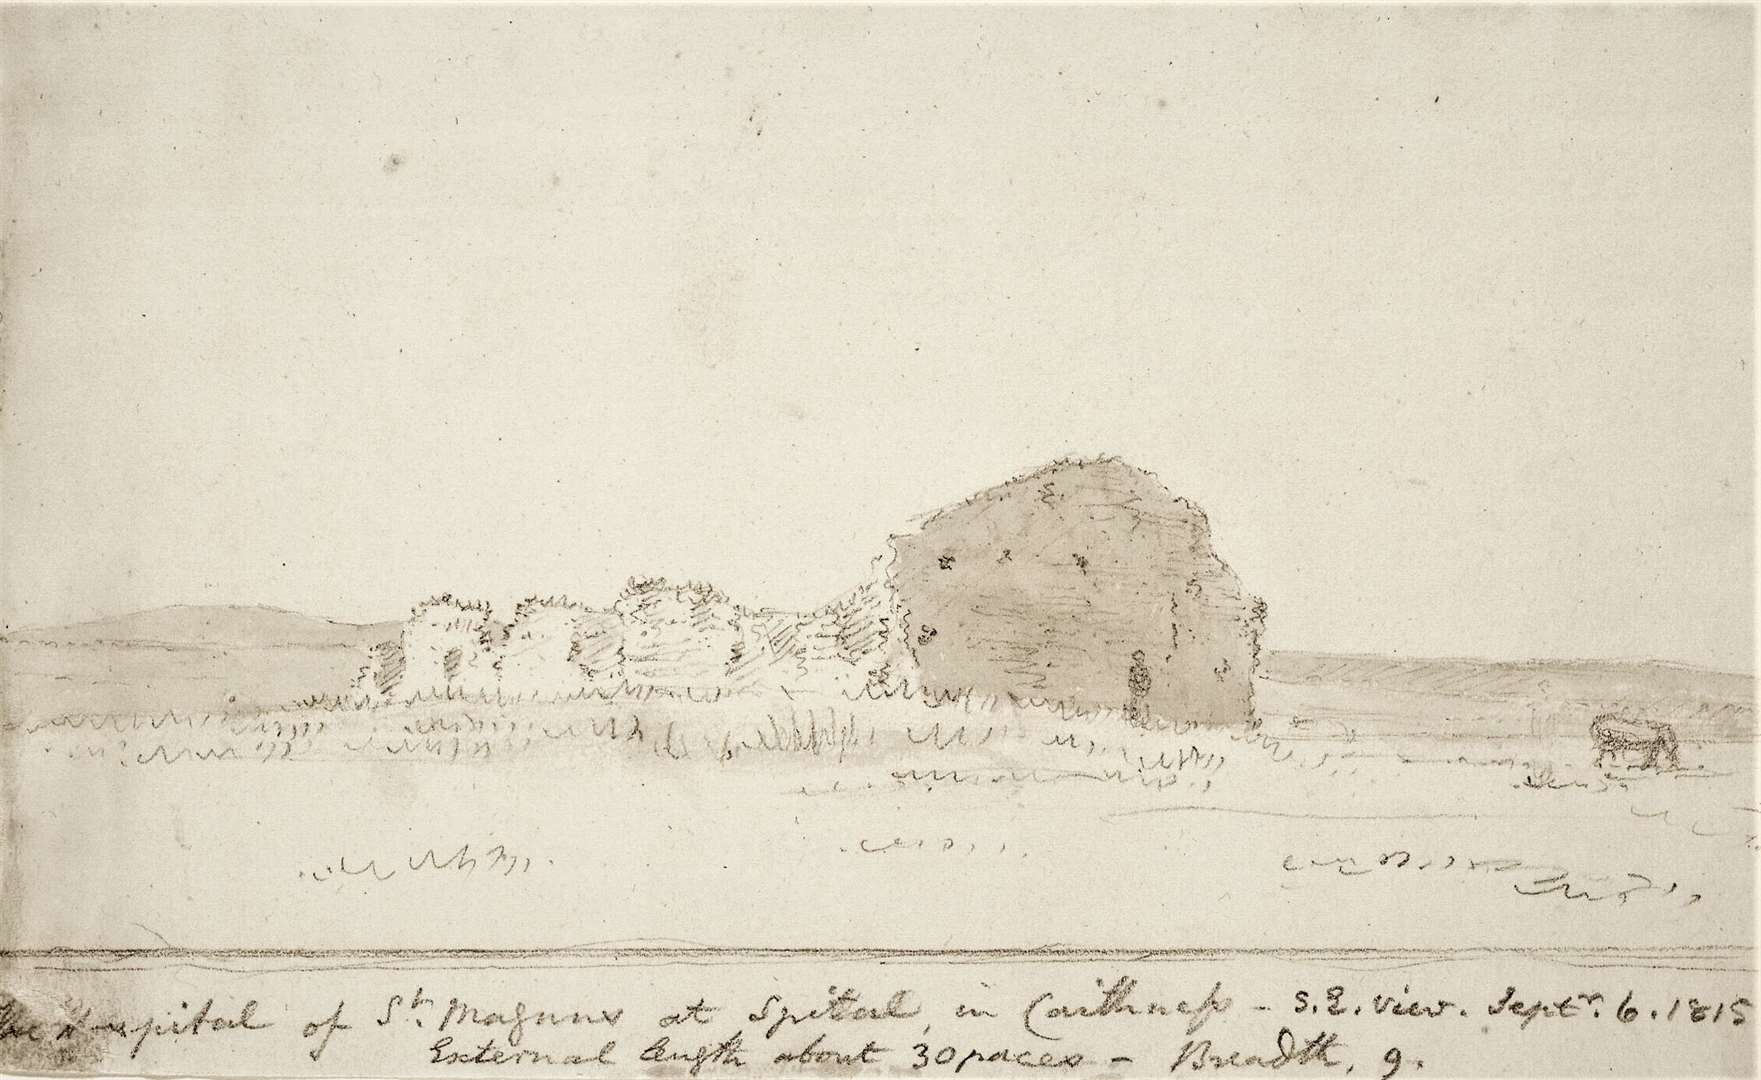 St Magnus hospital at Spittal from a drawing dated 1815 by George Henry Hutton. Picture: National Library of Scotland